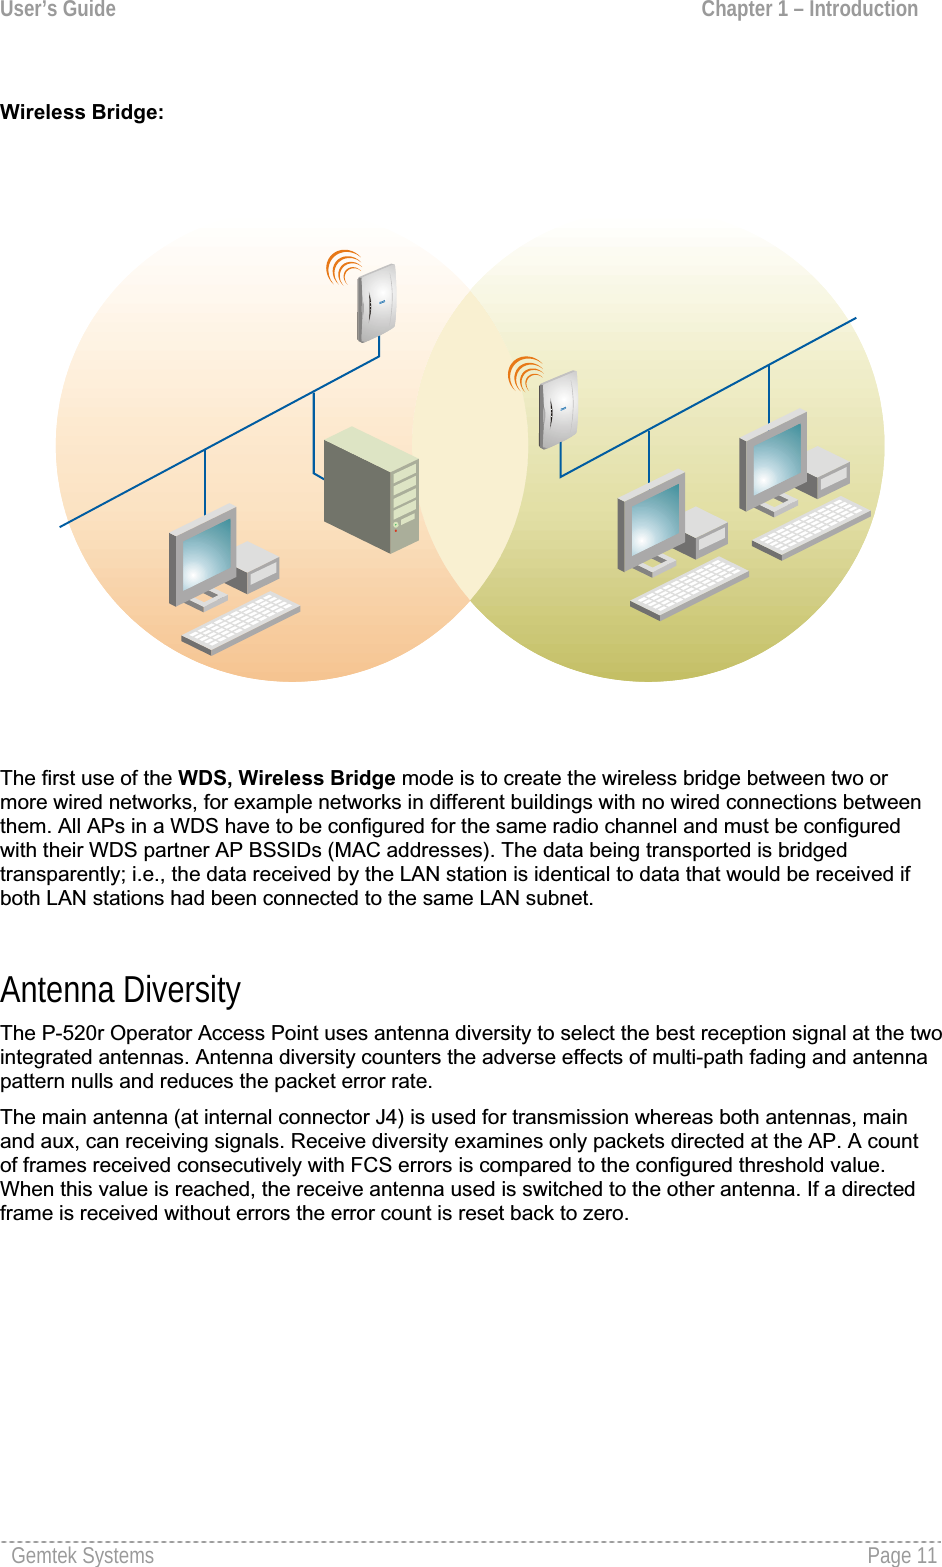 User’s Guide  Chapter 1 – Introduction Wireless Bridge:The first use of the WDS, Wireless Bridge mode is to create the wireless bridge between two or more wired networks, for example networks in different buildings with no wired connections betweenthem. All APs in a WDS have to be configured for the same radio channel and must be configuredwith their WDS partner AP BSSIDs (MAC addresses). The data being transported is bridged transparently; i.e., the data received by the LAN station is identical to data that would be received if both LAN stations had been connected to the same LAN subnet.Antenna Diversity The P-520r Operator Access Point uses antenna diversity to select the best reception signal at the two integrated antennas. Antenna diversity counters the adverse effects of multi-path fading and antennapattern nulls and reduces the packet error rate.The main antenna (at internal connector J4) is used for transmission whereas both antennas, main and aux, can receiving signals. Receive diversity examines only packets directed at the AP. A count of frames received consecutively with FCS errors is compared to the configured threshold value.When this value is reached, the receive antenna used is switched to the other antenna. If a directedframe is received without errors the error count is reset back to zero.Gemtek Systems  Page 11